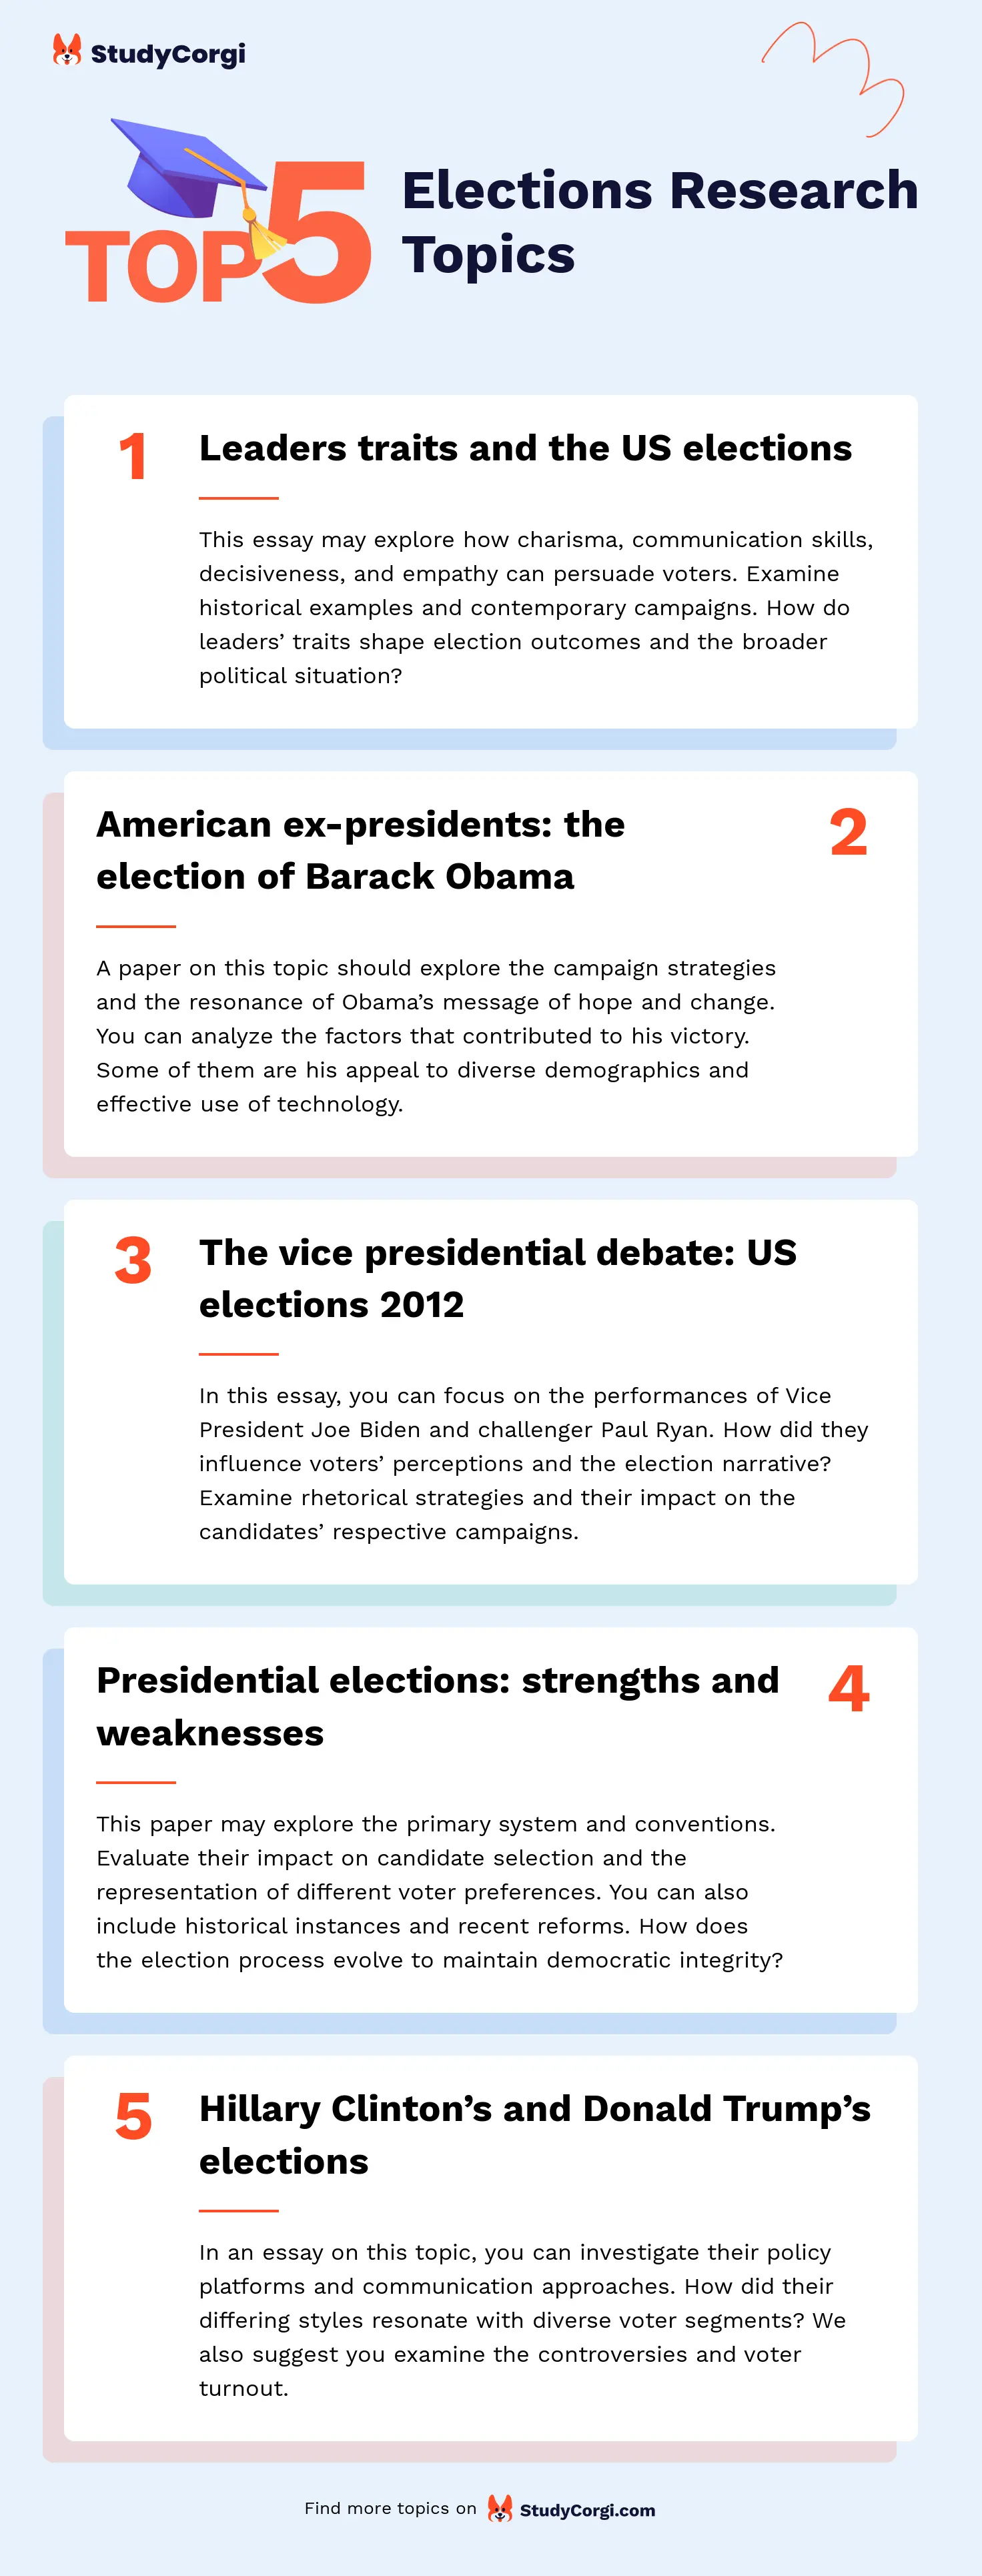 TOP-5 Elections Research Topics